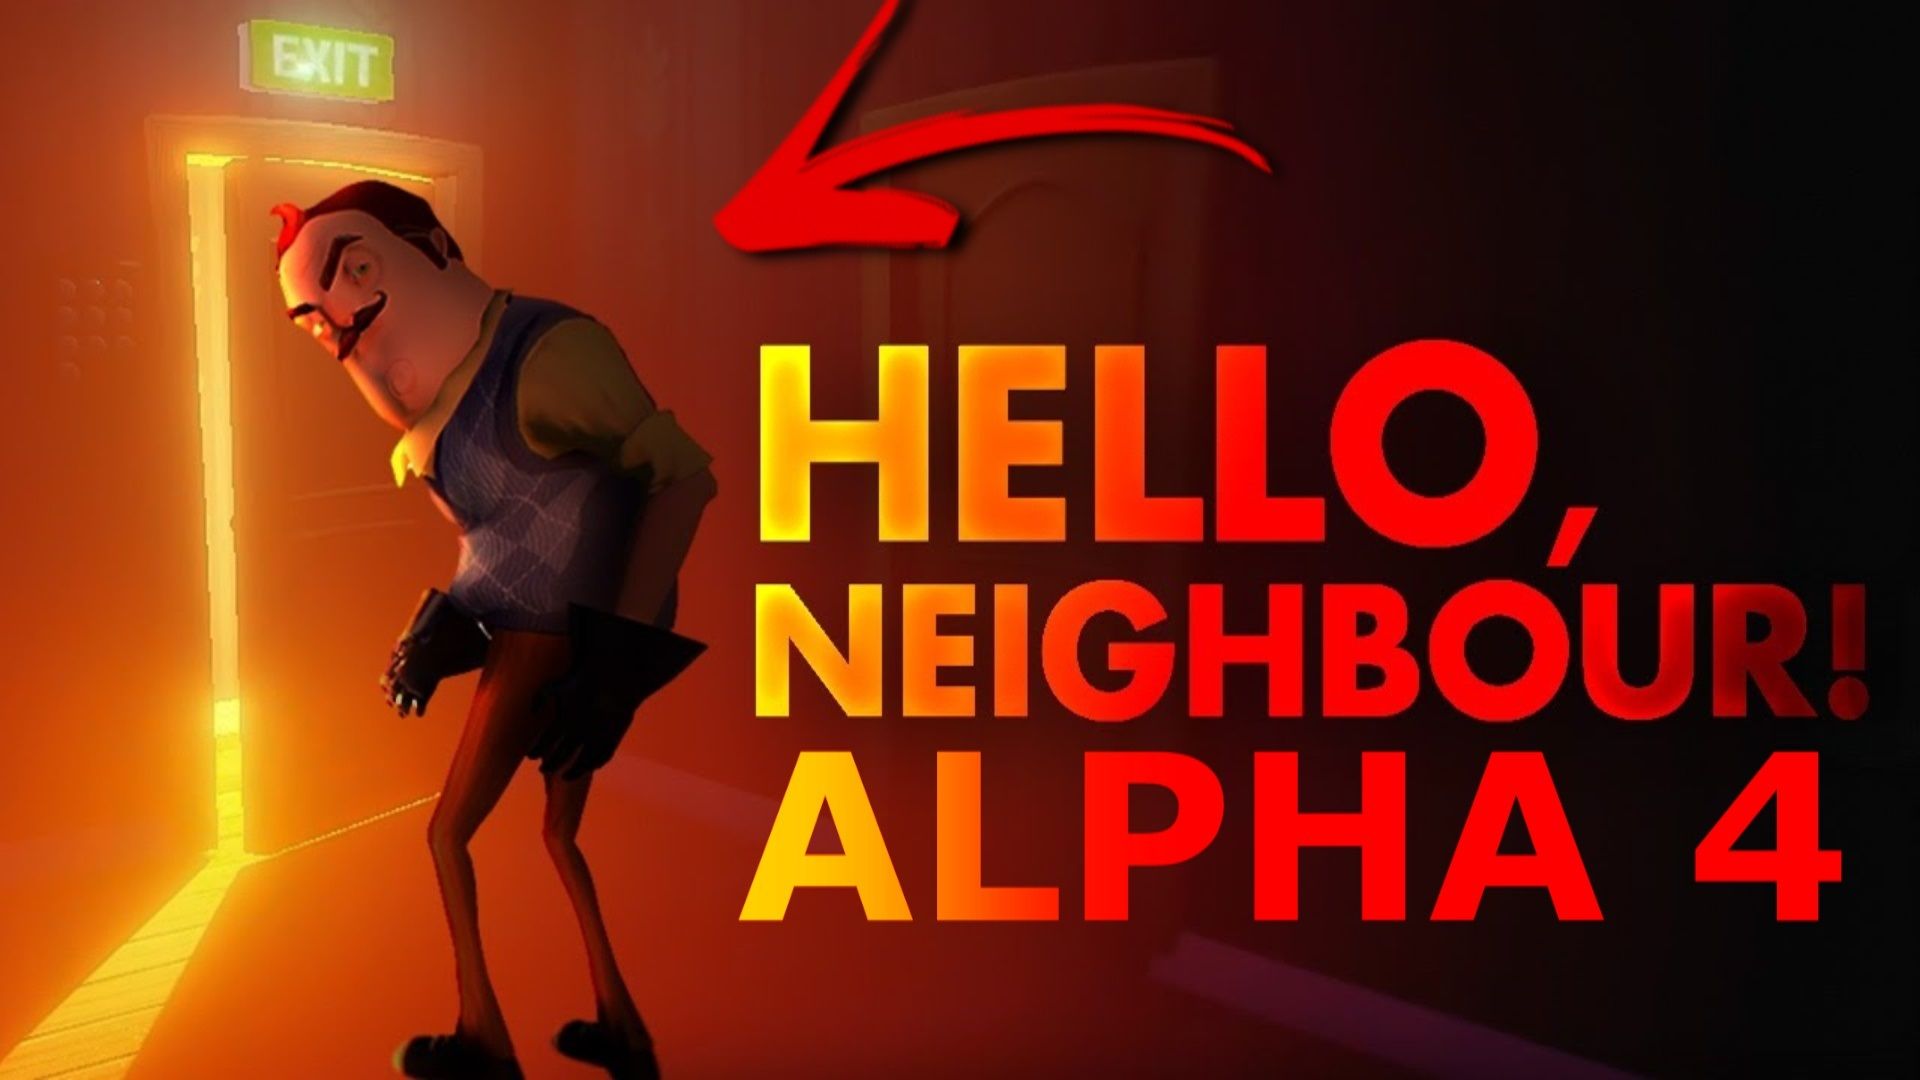 hello neighbour 2 download free